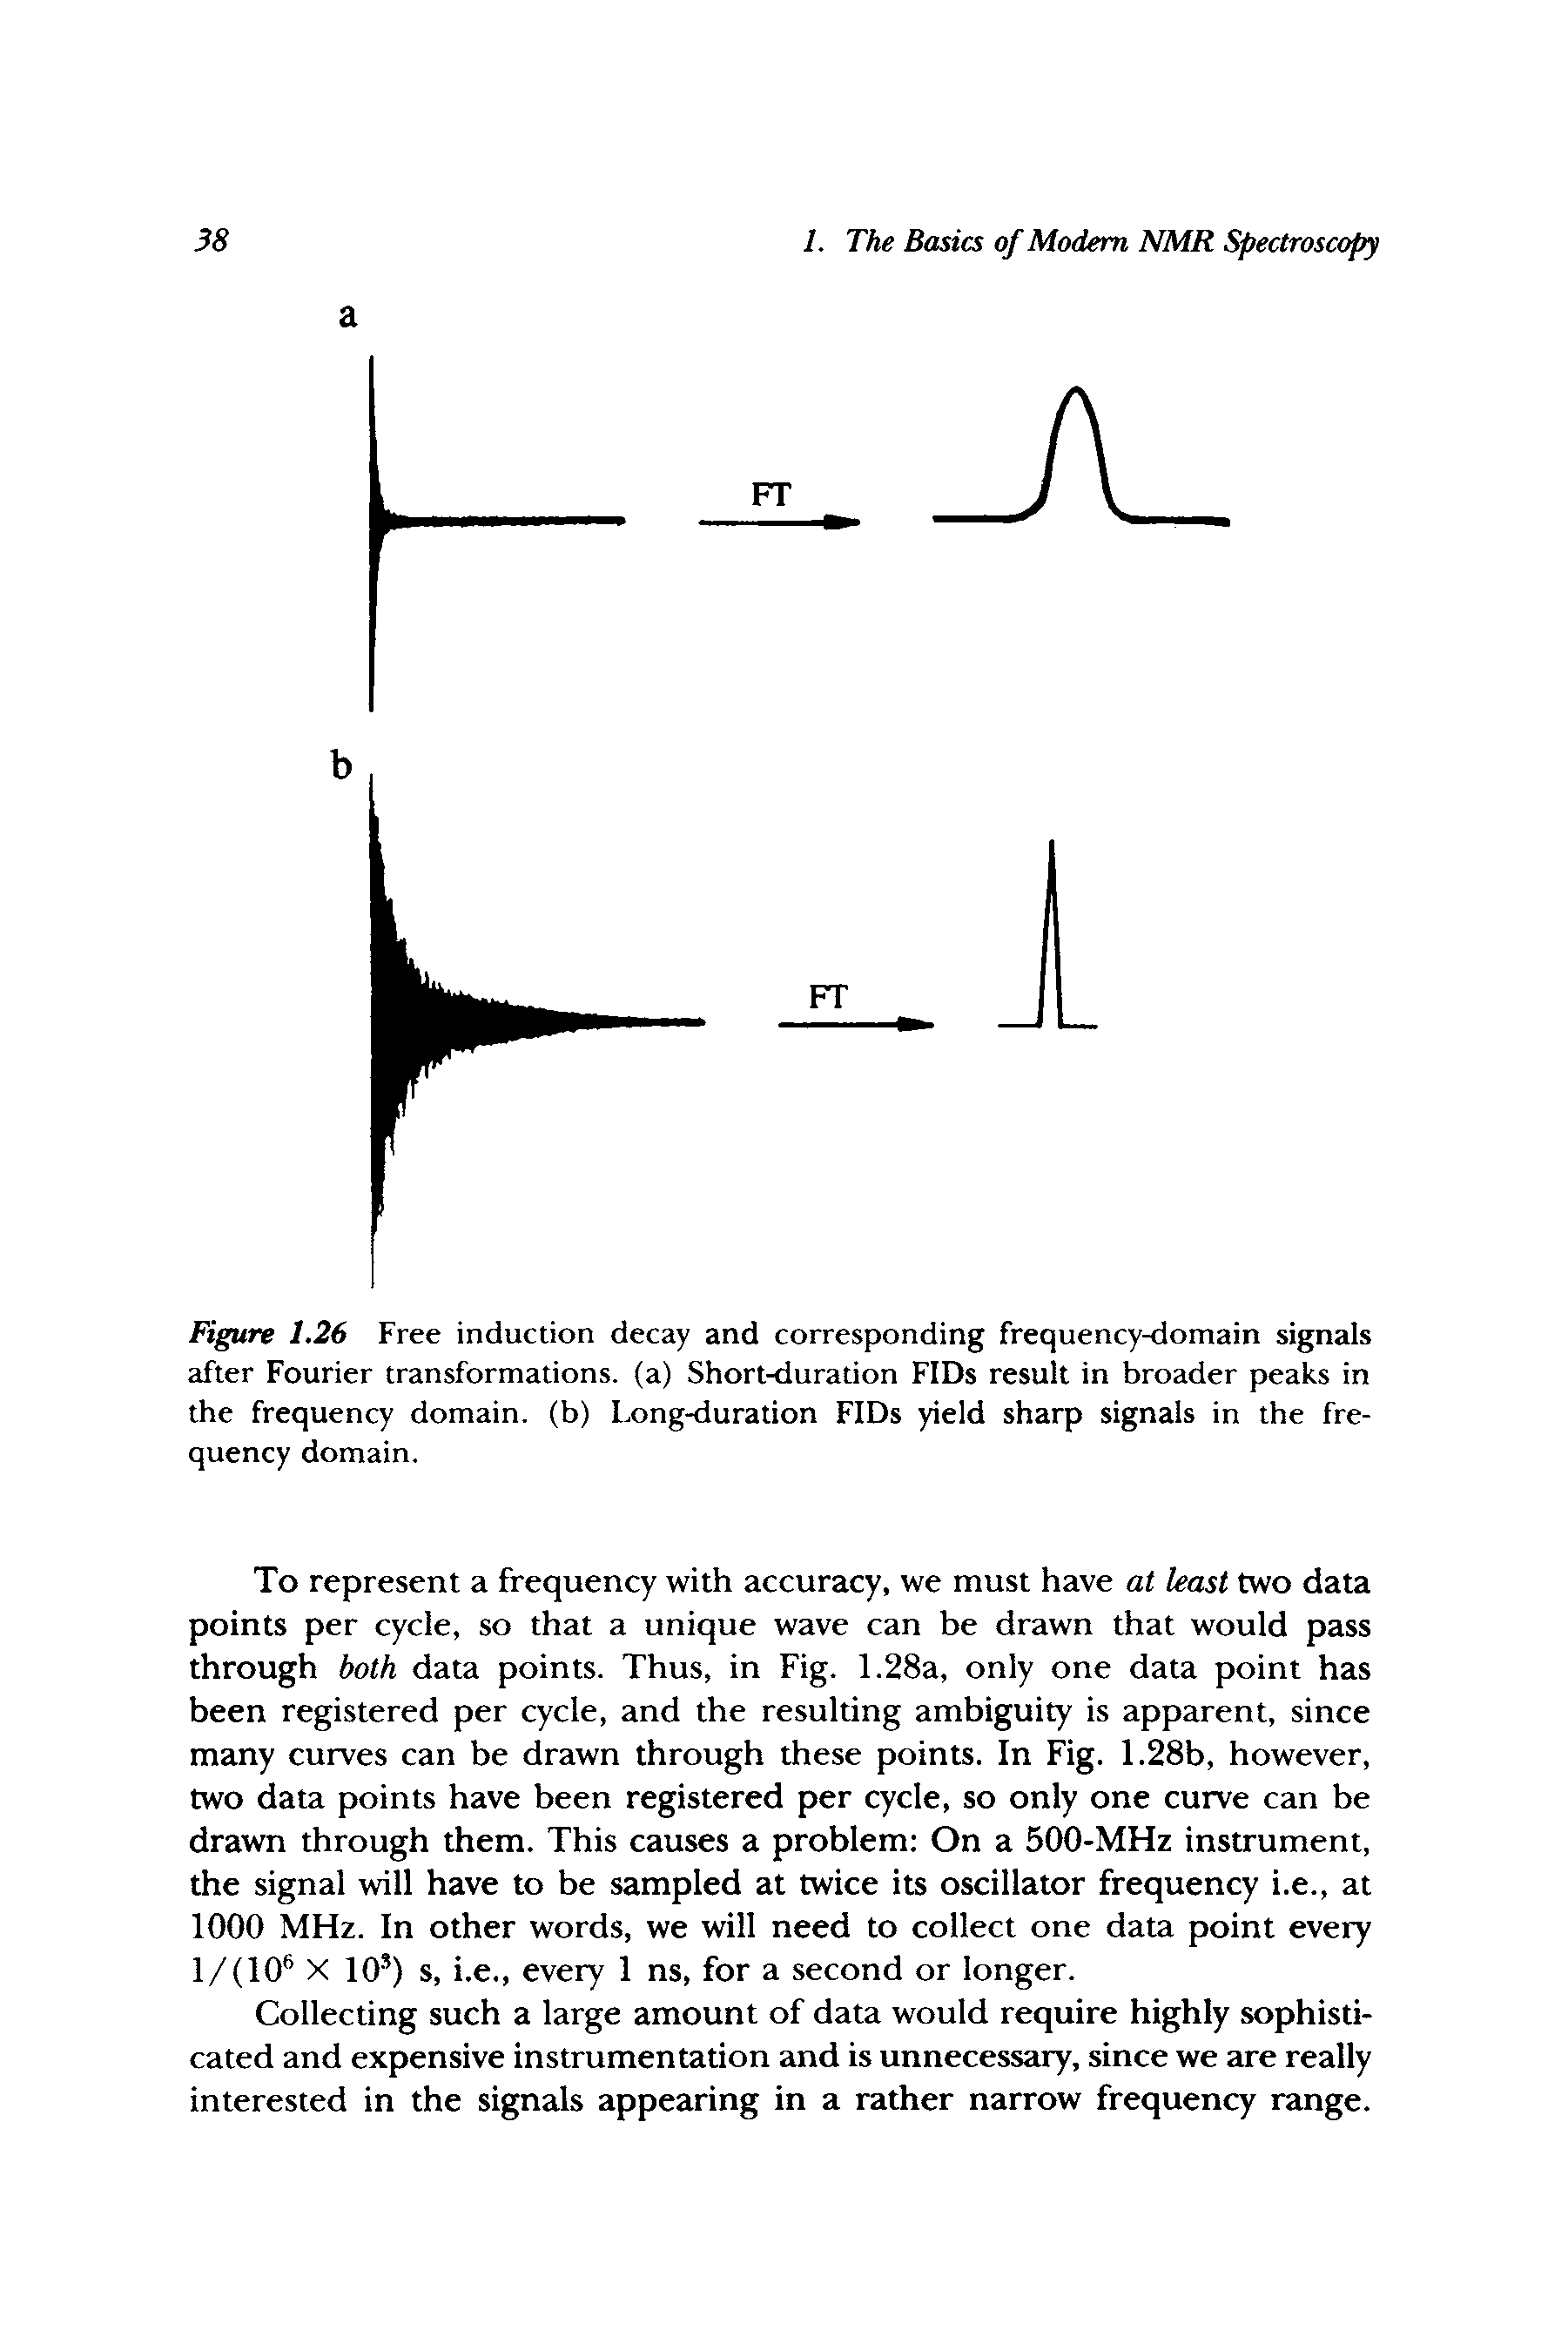 Figure 1.26 Free induction decay and corresponding frequency-domain signals after Fourier transformations, (a) Short-duration FIDs result in broader peaks in the frequency domain, (b) Long-duration FIDs yield sharp signals in the frequency domain.